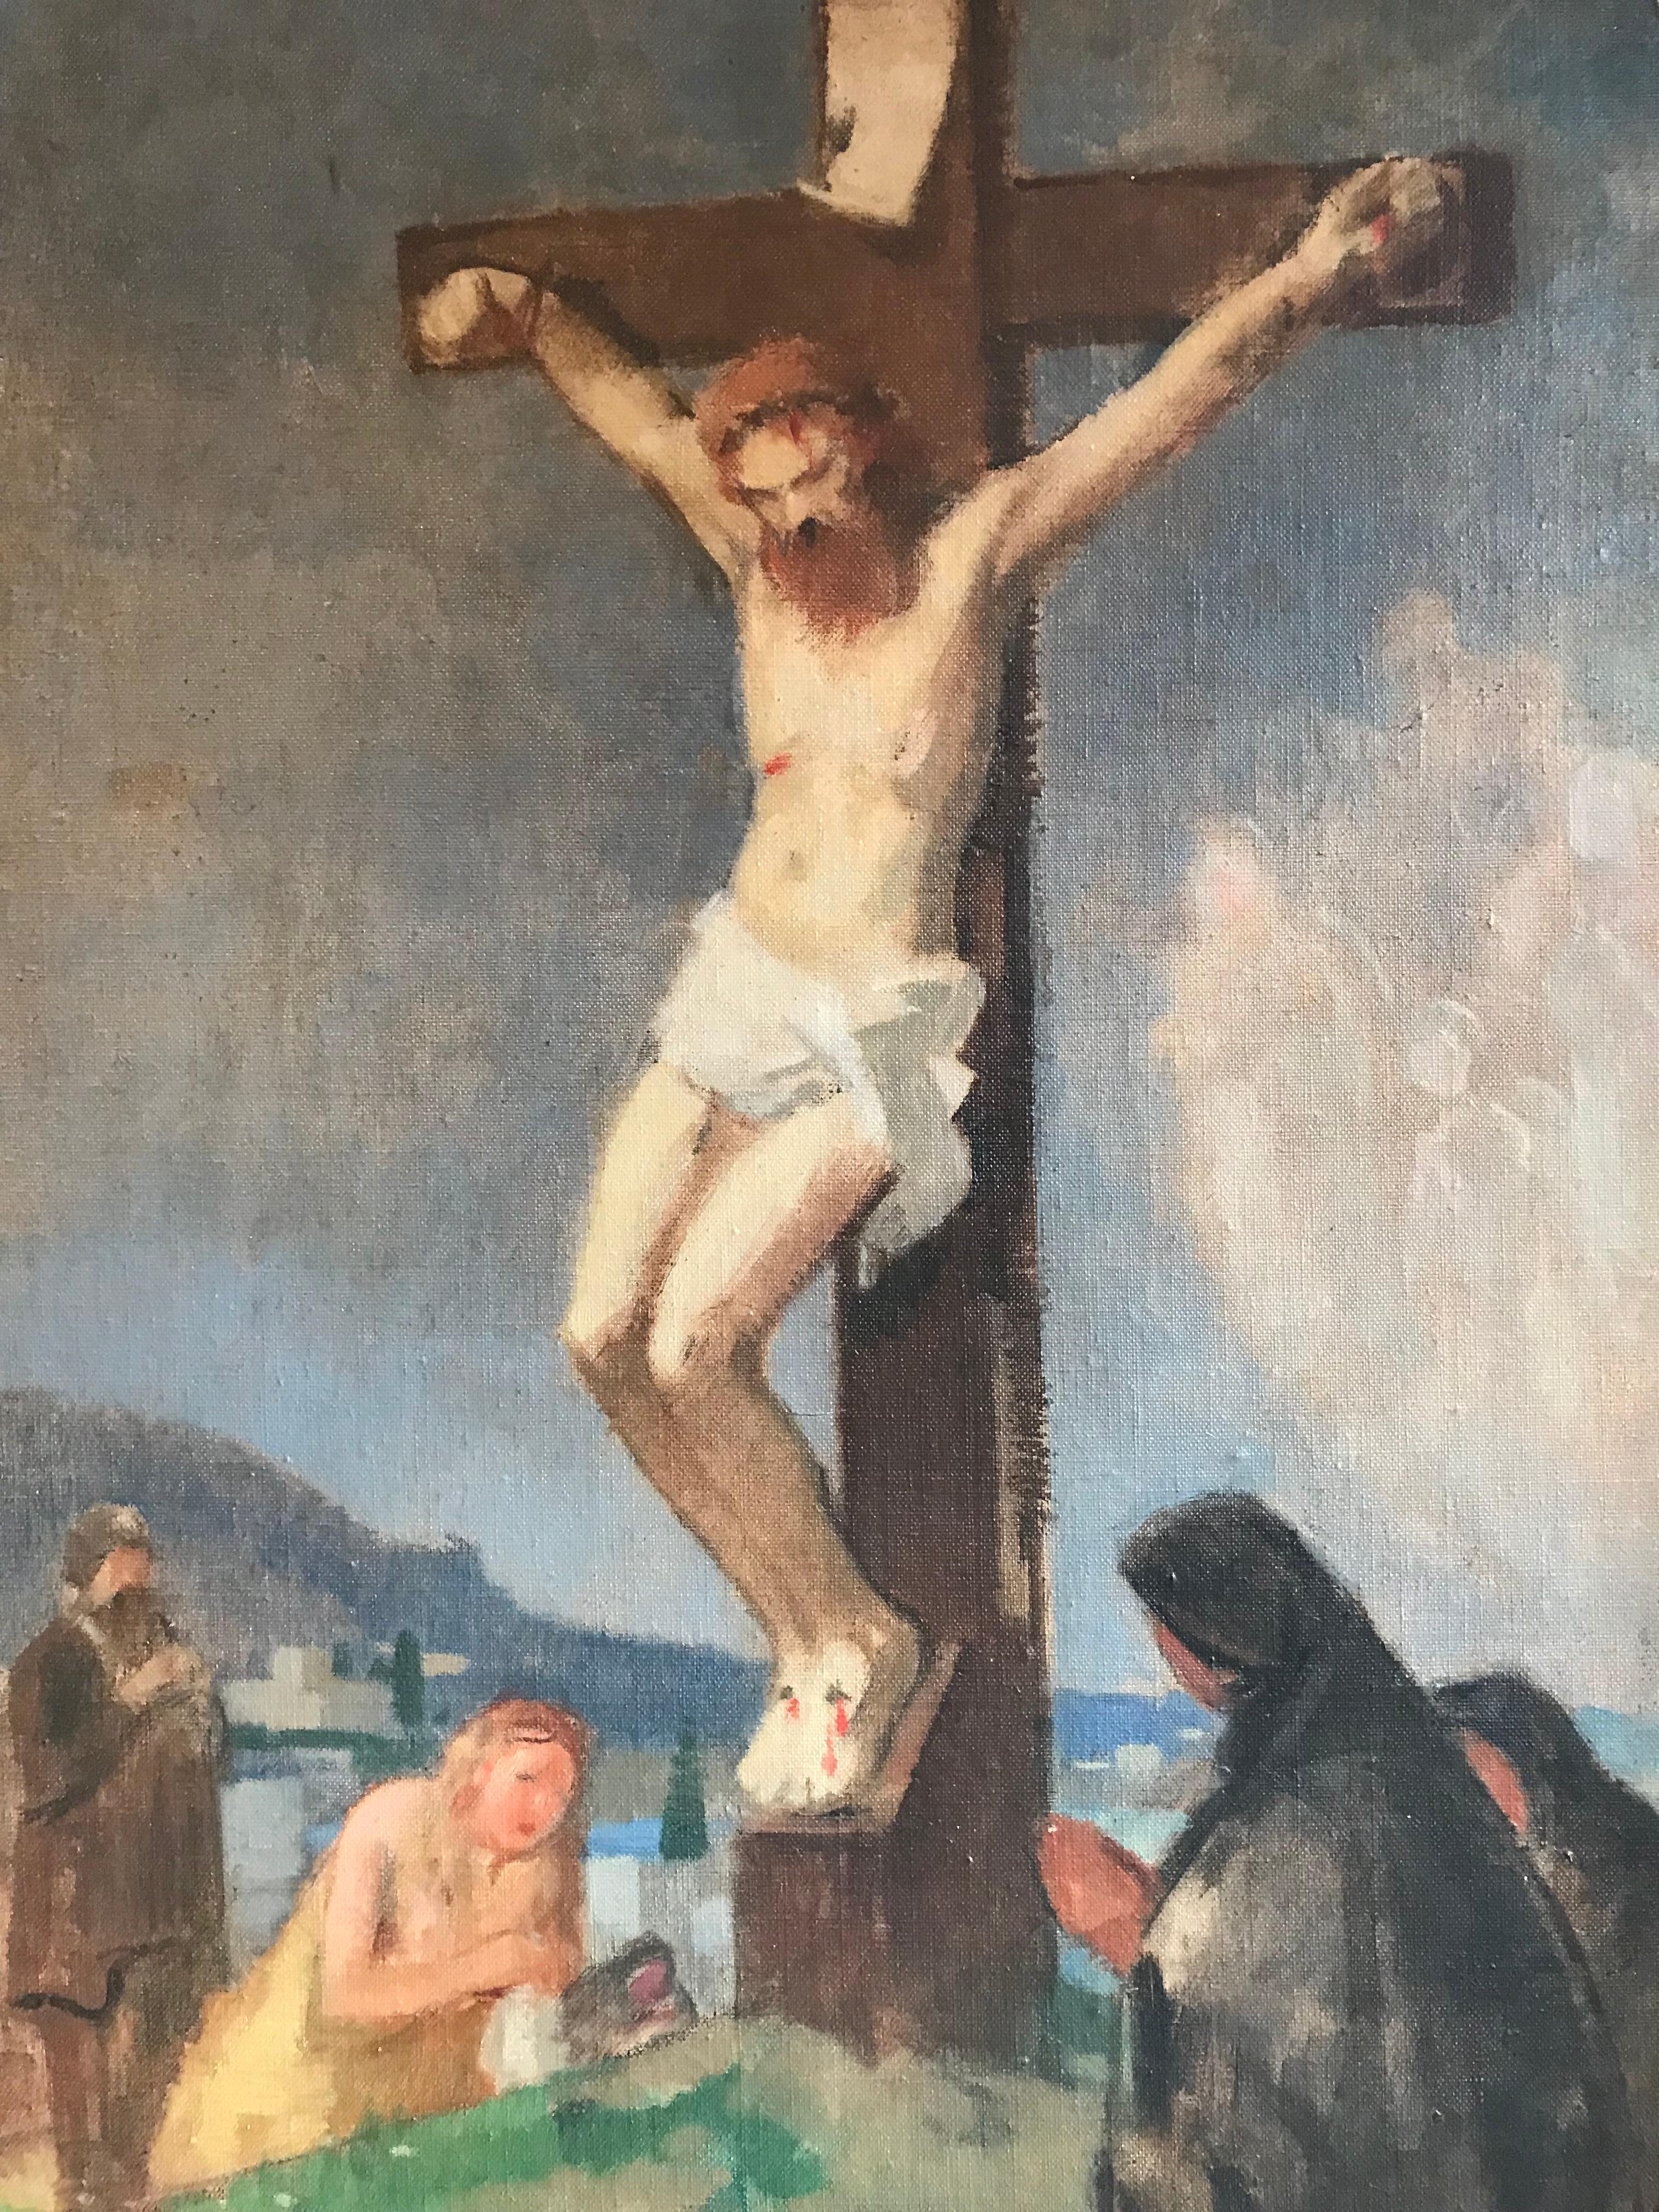 The Crucifixion
by Lucien Victor GUIRAND DE SCÉVOLA (French, 1871-1950) 
oil painting on canvas laid over board
presented in tryptich format within frame
framed measurements: 31 x 43 inches
provenance: private collection, France

Captivating